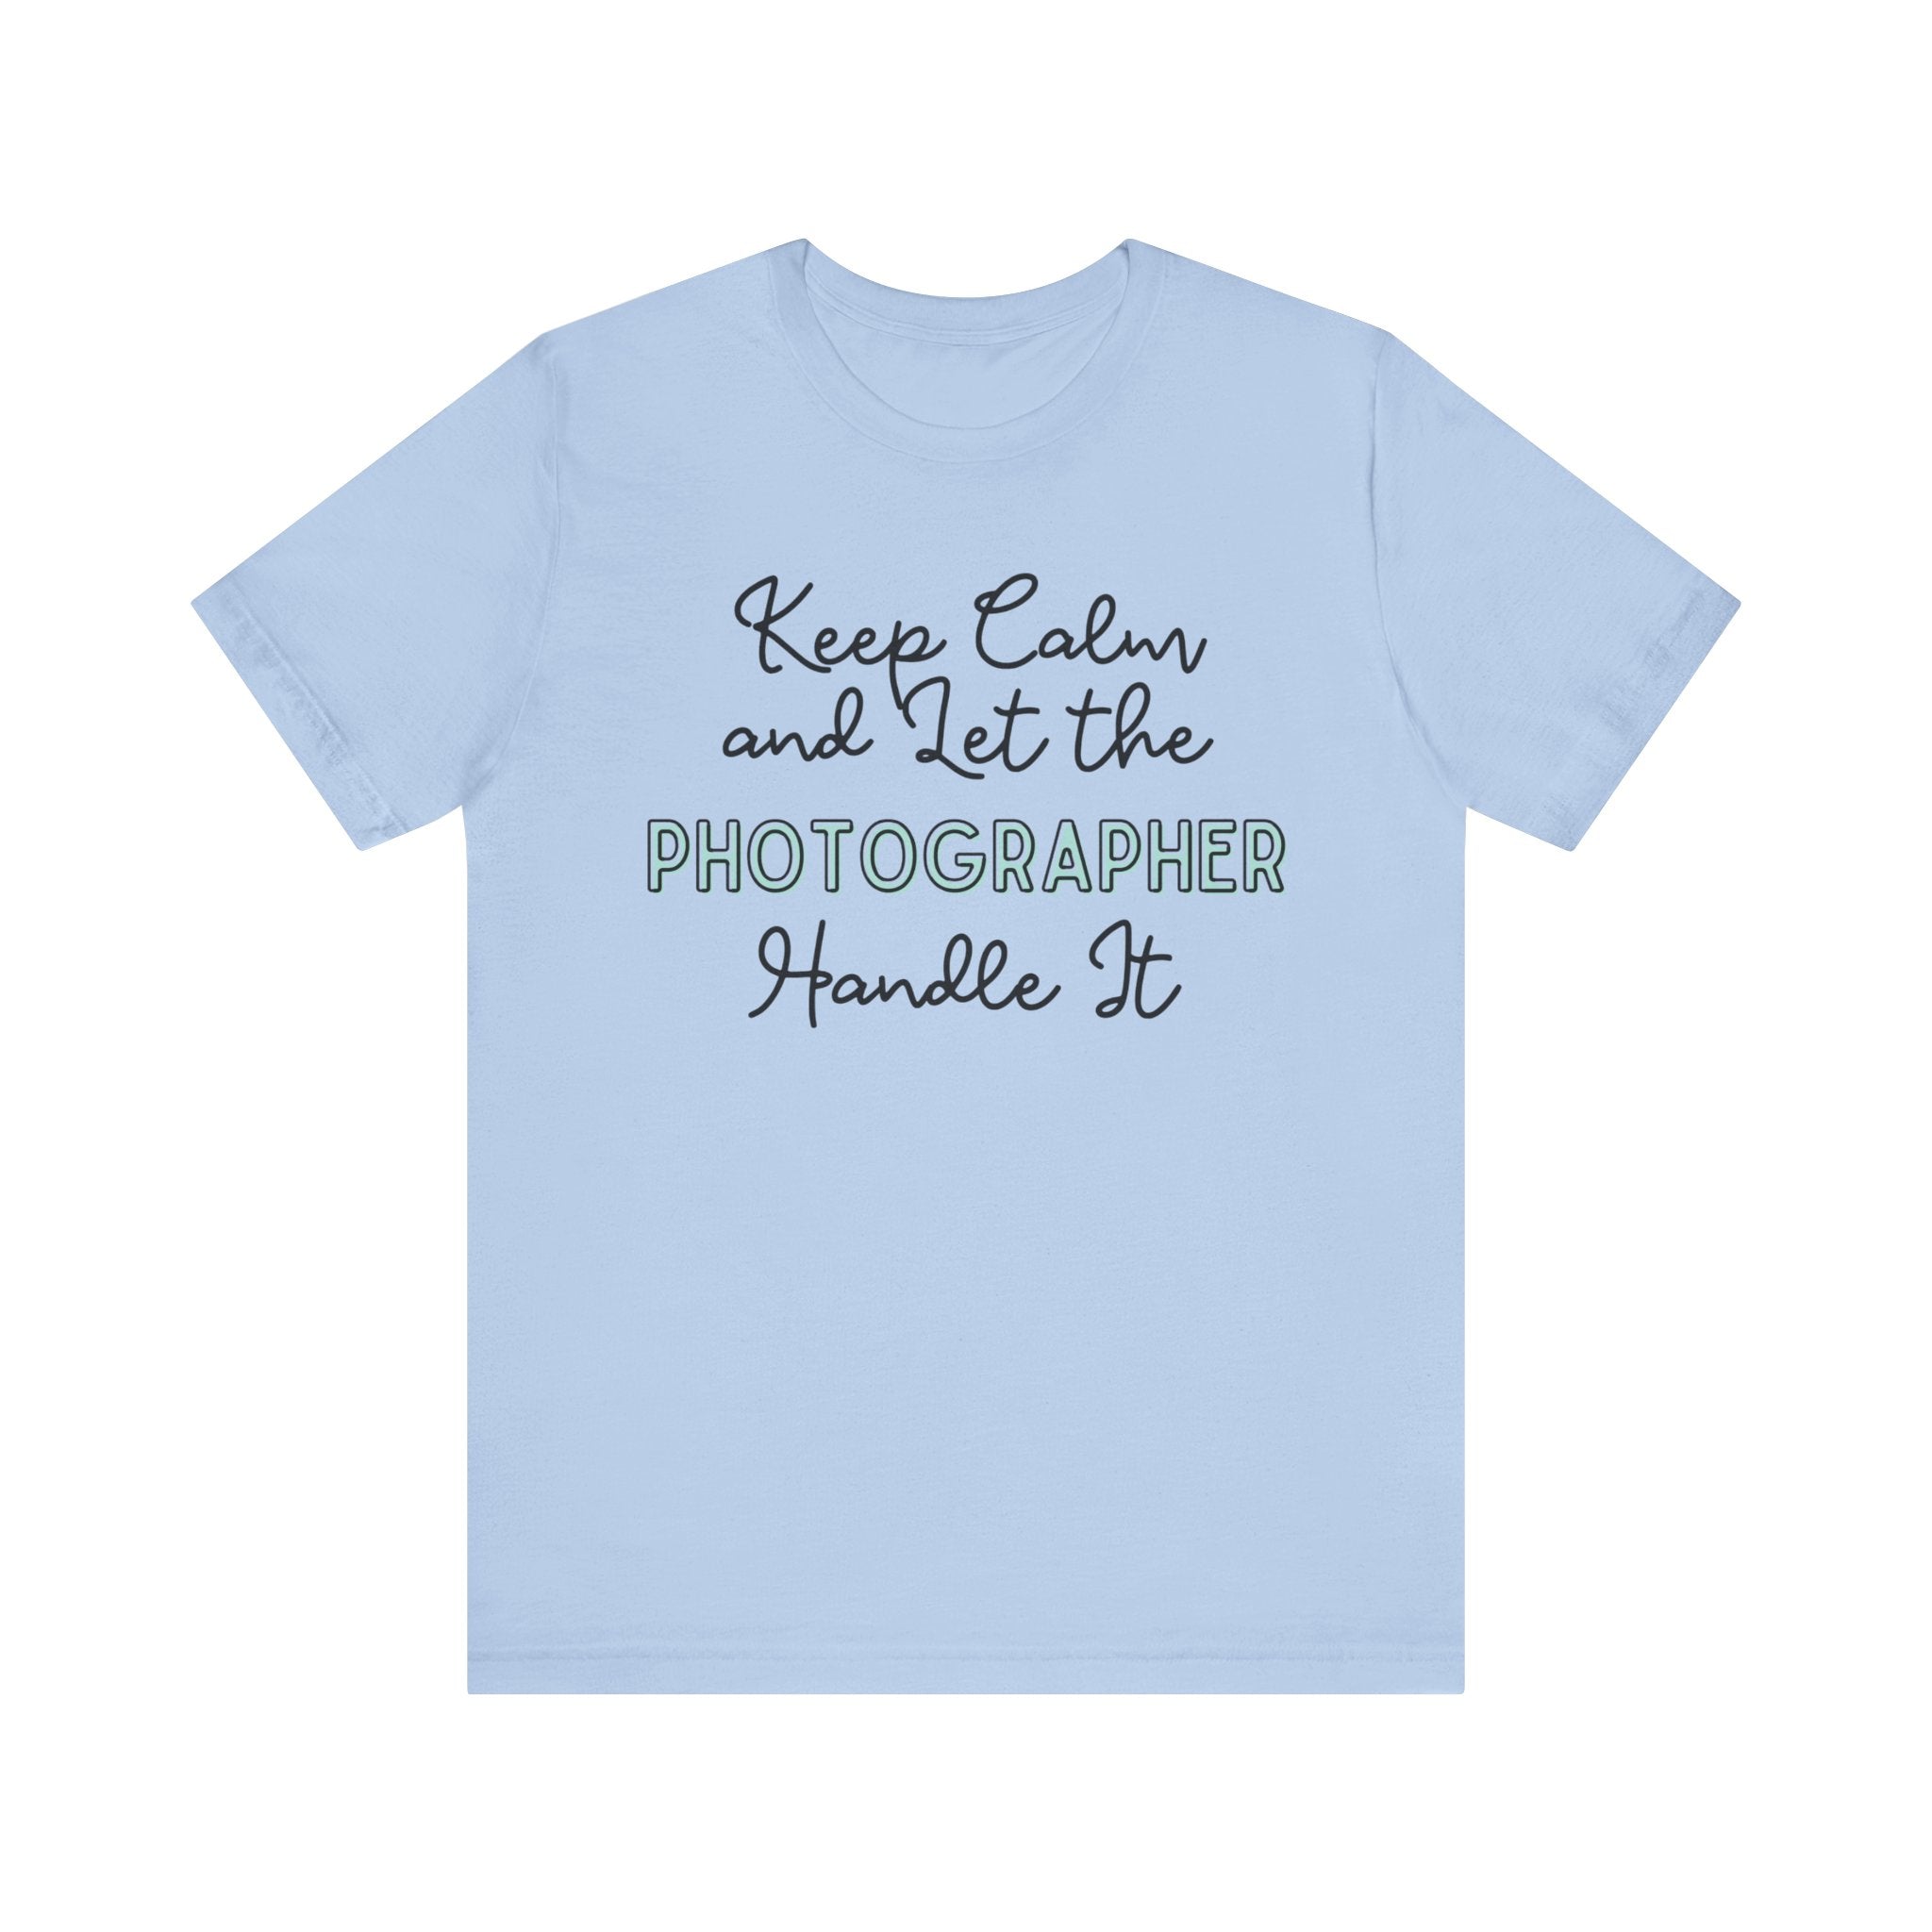 Keep Calm and let the Photographer handle It - Jersey Short Sleeve Tee